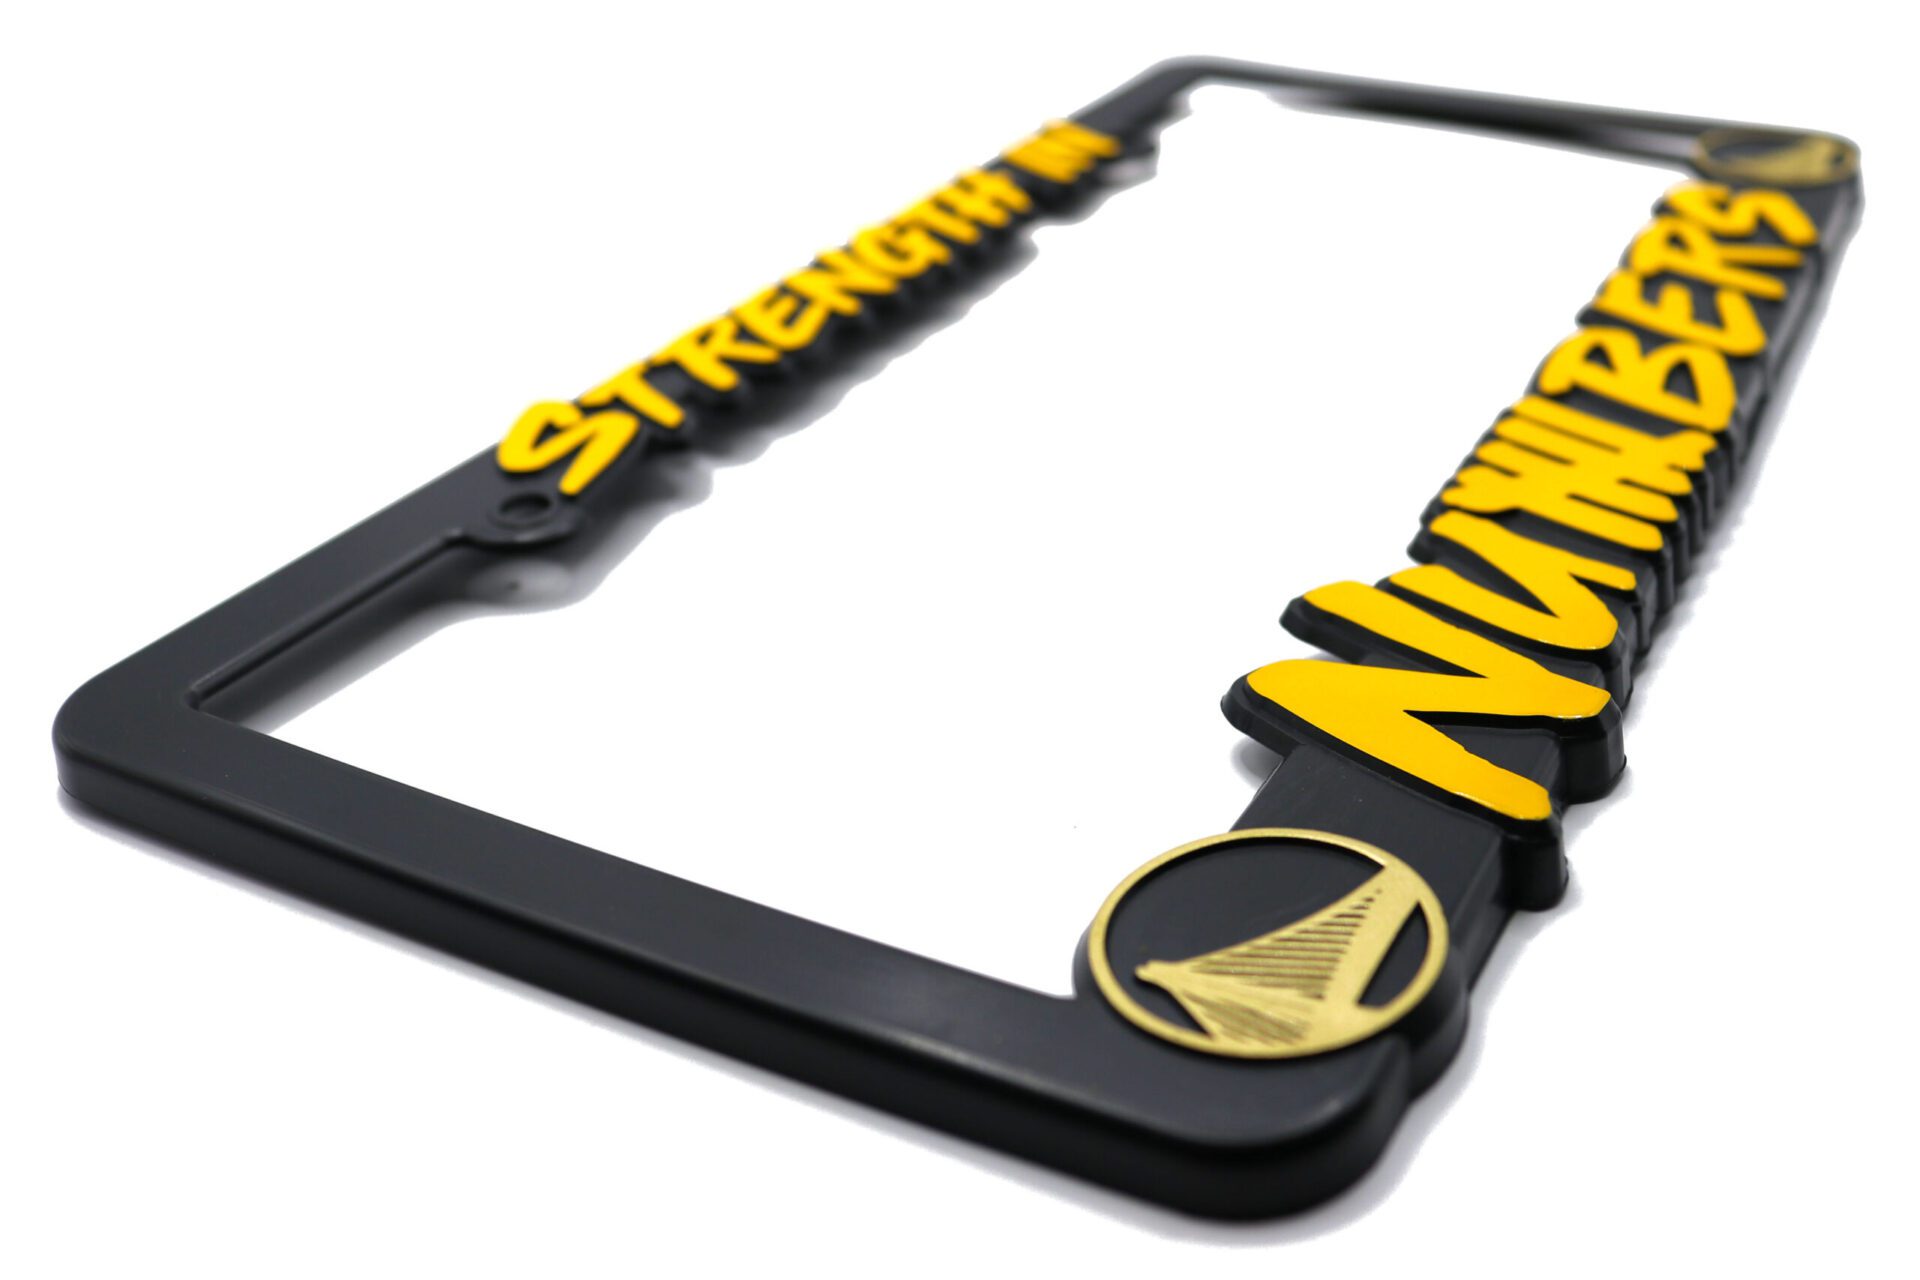 Golden State Warriors “Strength in Numbers” License Plate Frame (Yellow and Gold)